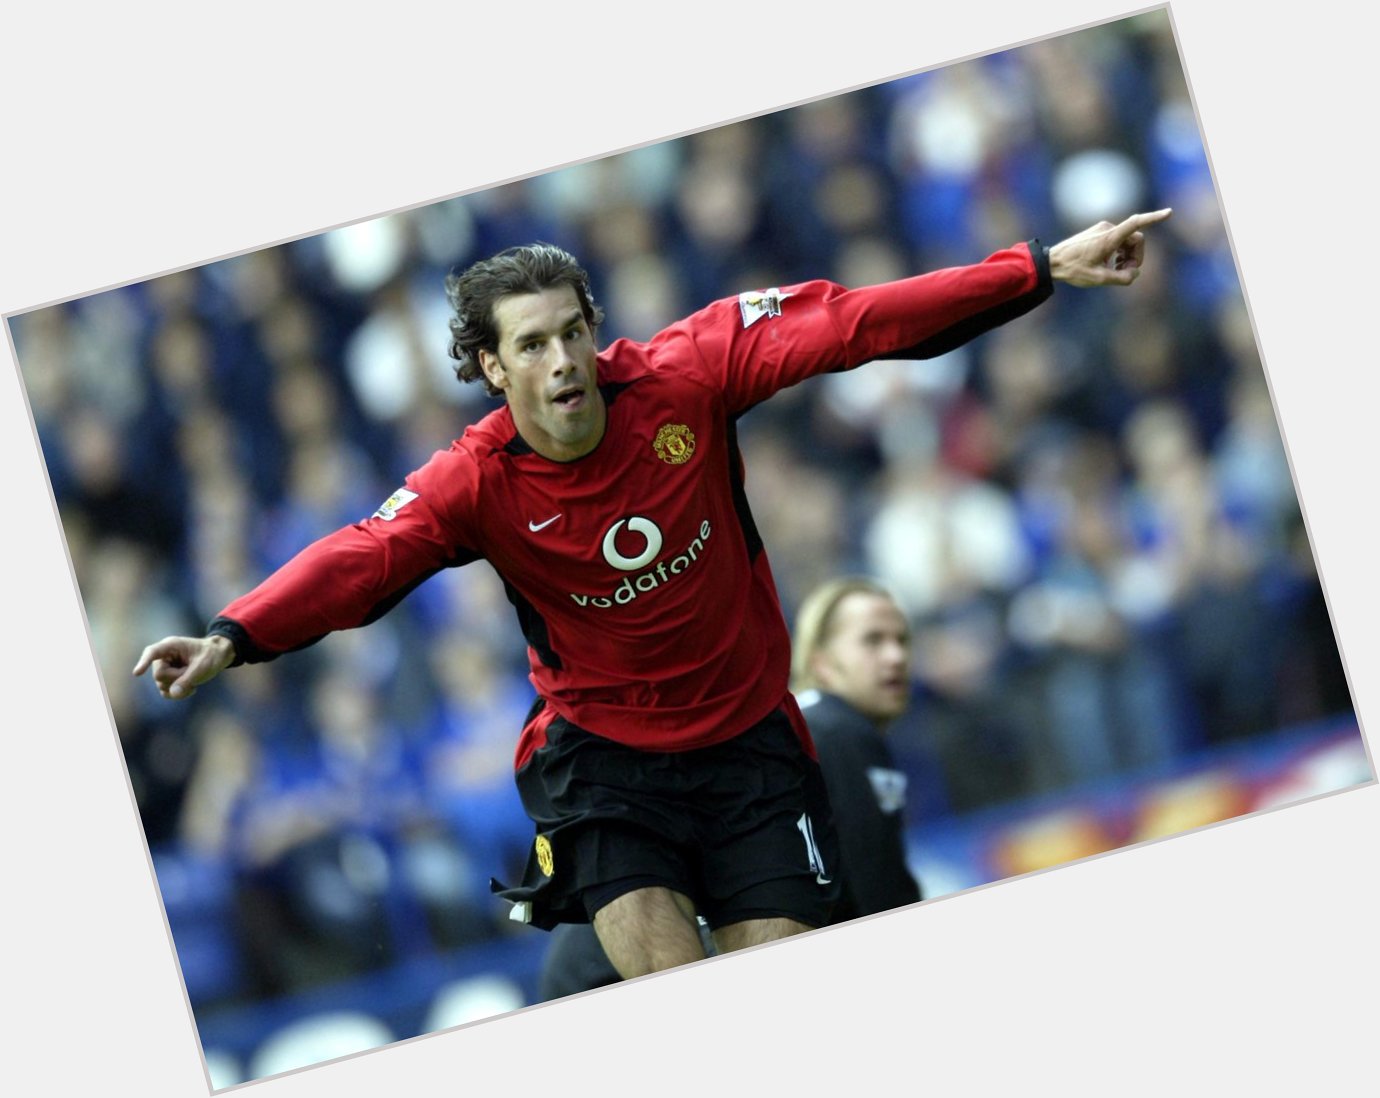 Happy Birthday to Ruud van Nistelrooy!

One of the best finishers the Premier League has ever seen! 